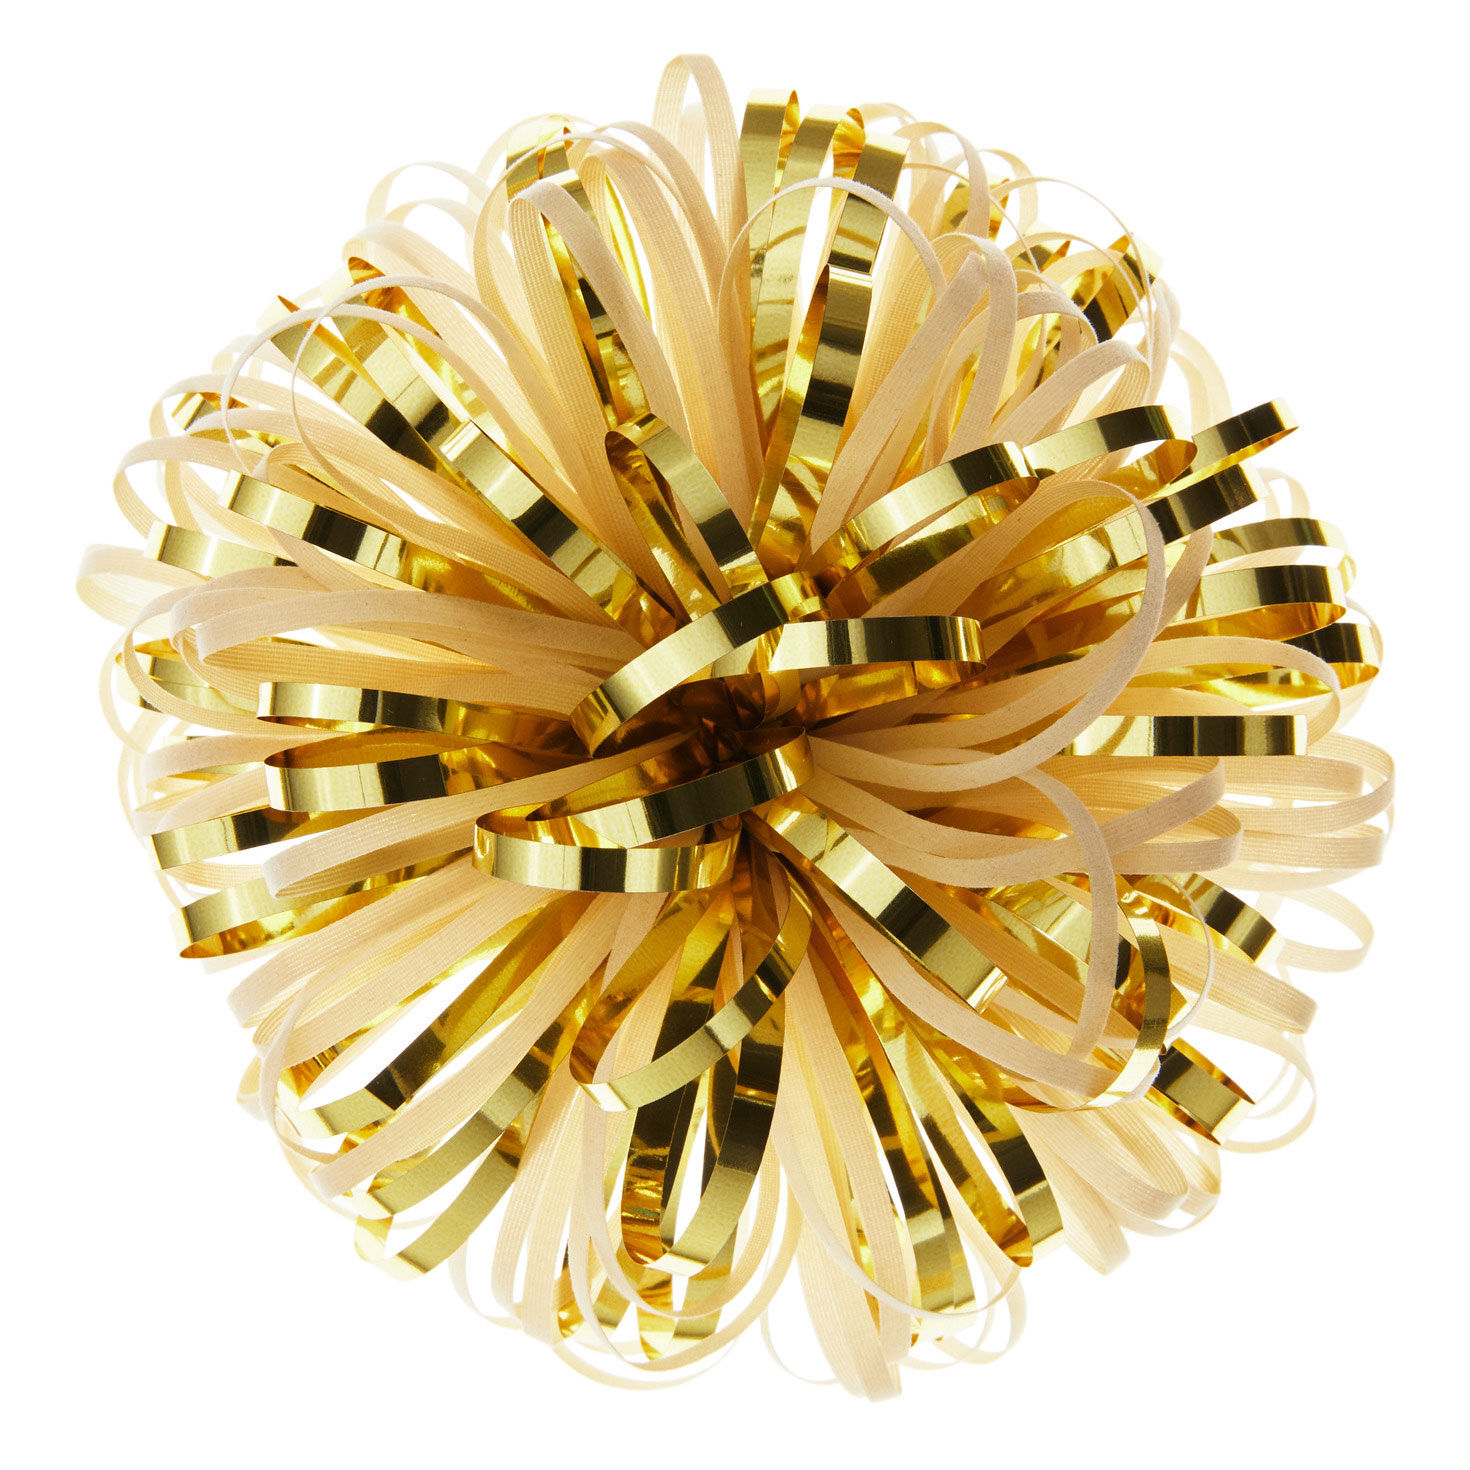 5" Ivory and Gold Metallic Pom-Pom Gift Bow for only USD 3.99 | Hallmark